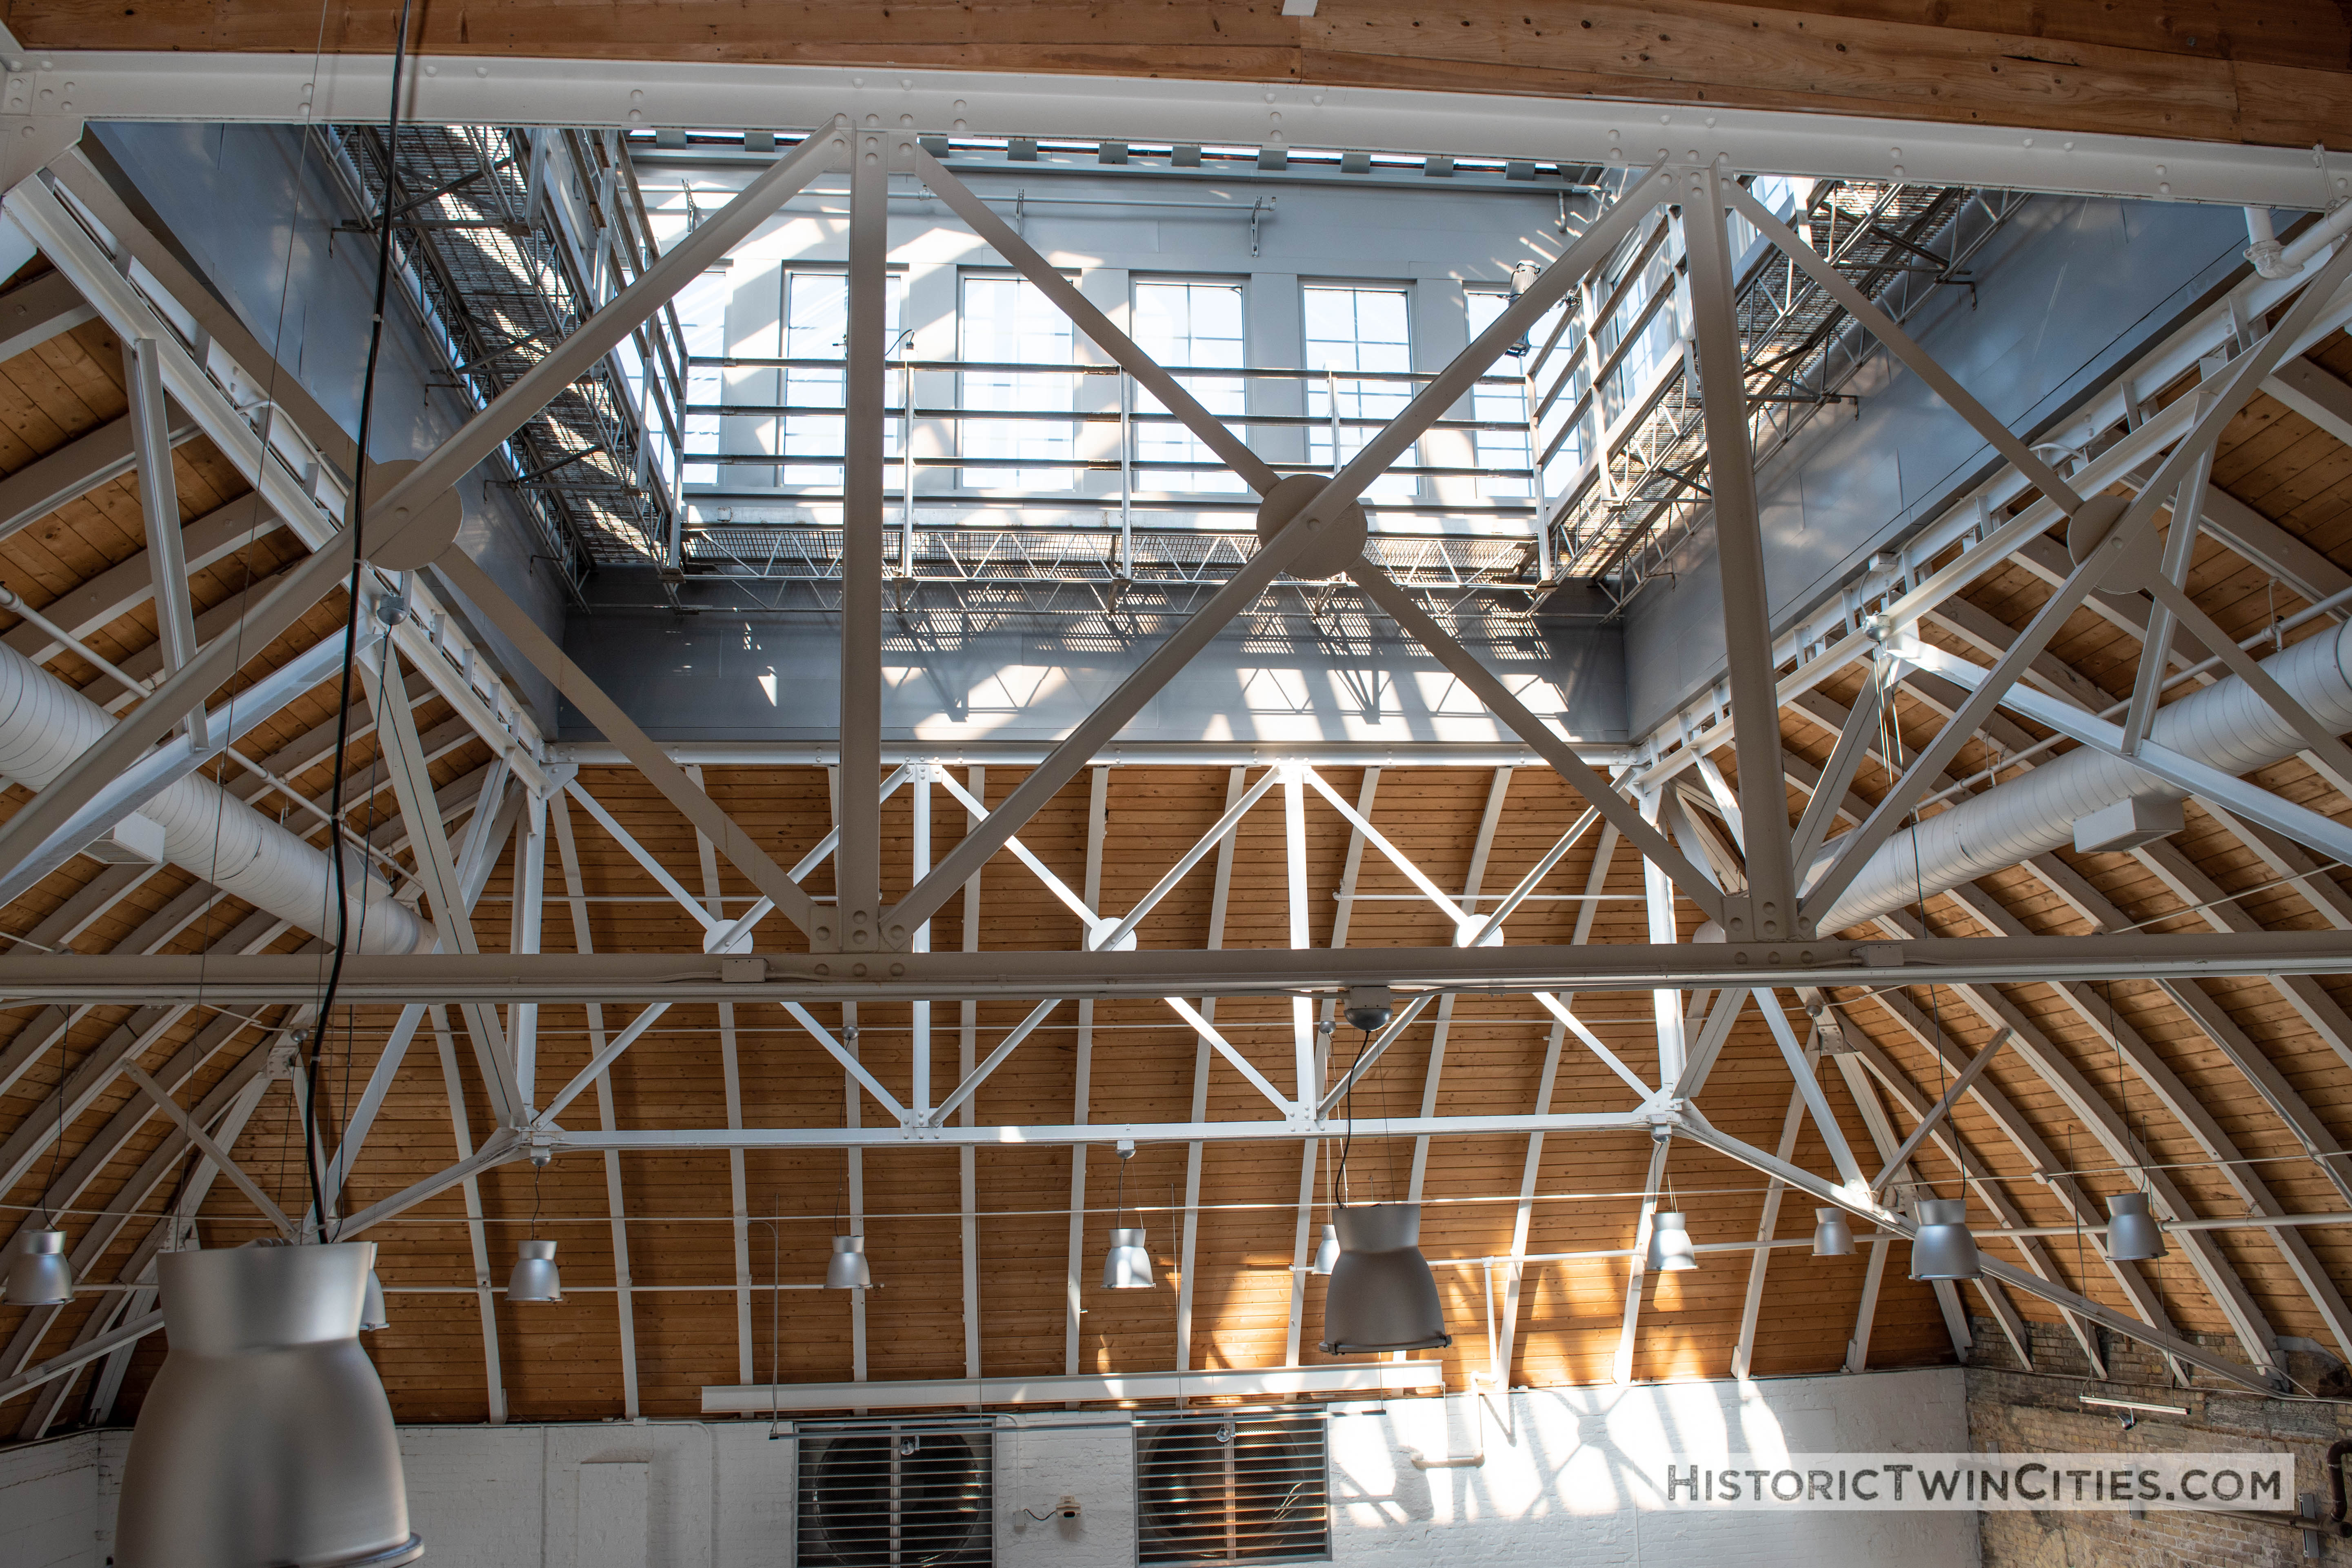 Looking up into the belvedere from the fifth floor of the Grain Belt brew house